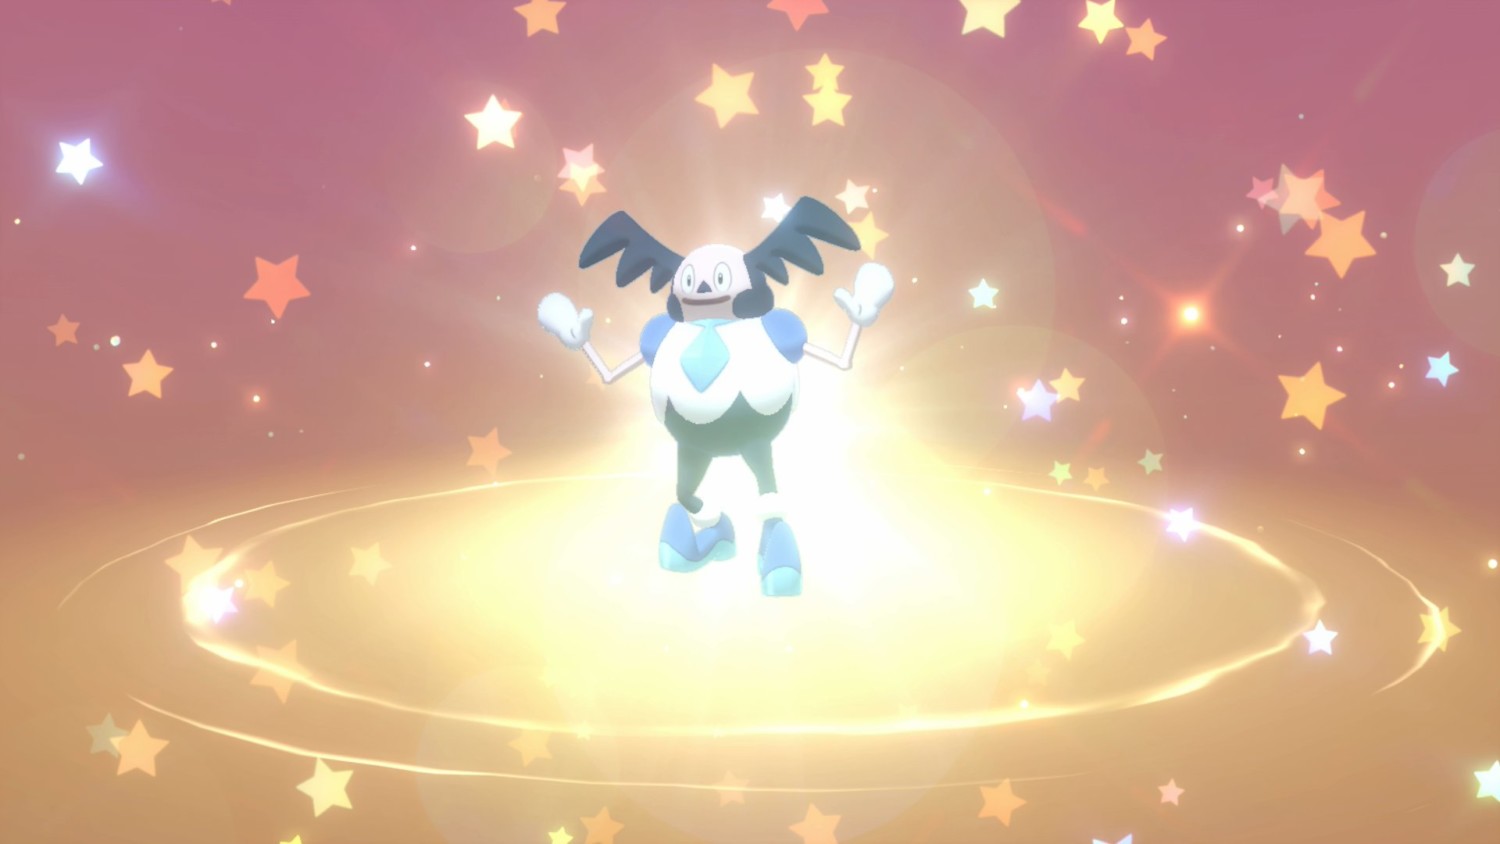 Shiny Galarian Zapdos Gift Now Available For Pokemon Sword/Shield 2022  International Challenge March Participants – NintendoSoup